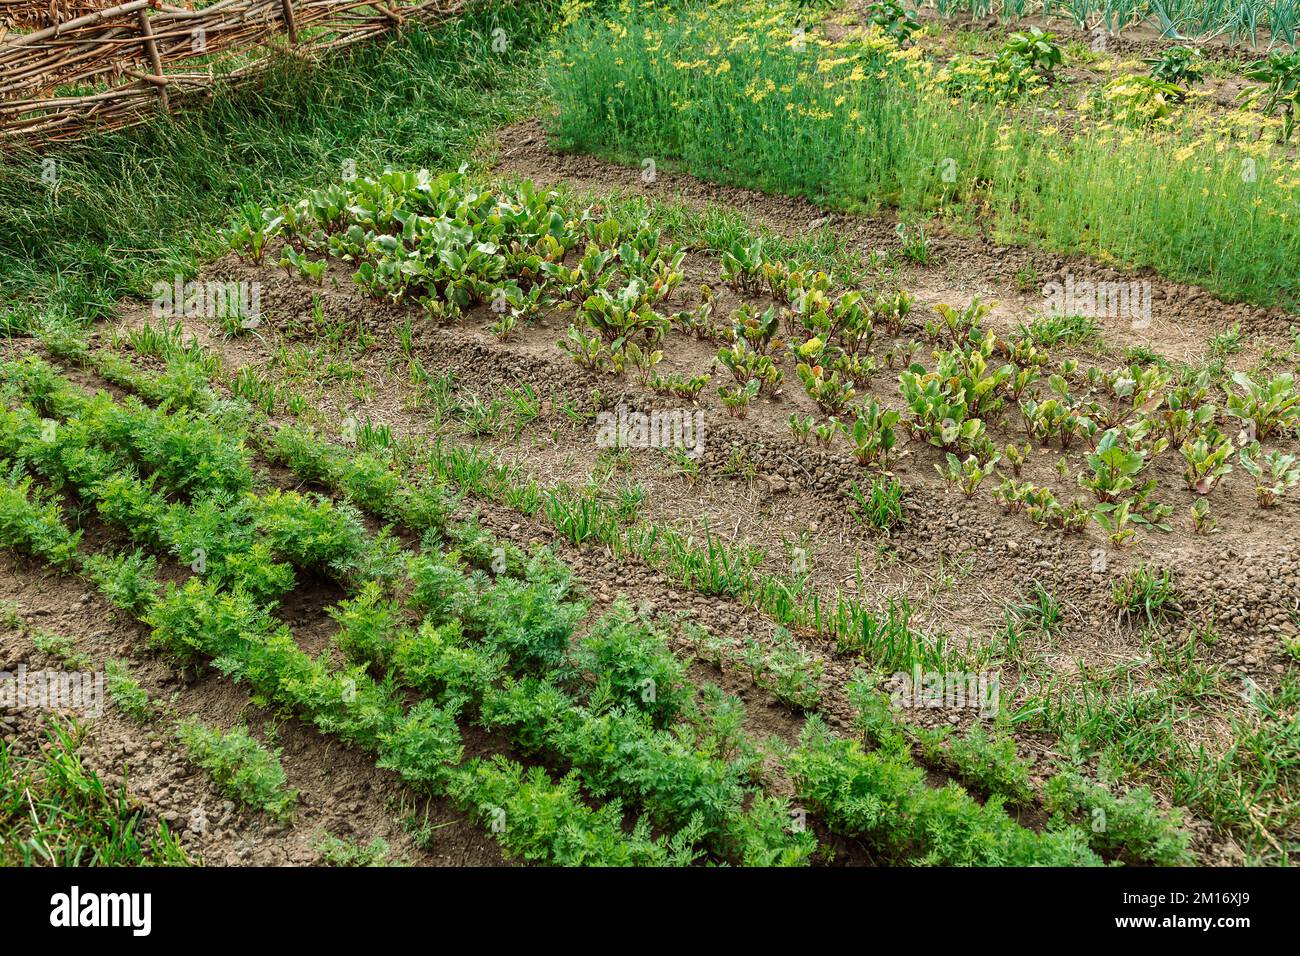 Beds with greens and young vegetables in the garden Stock Photo